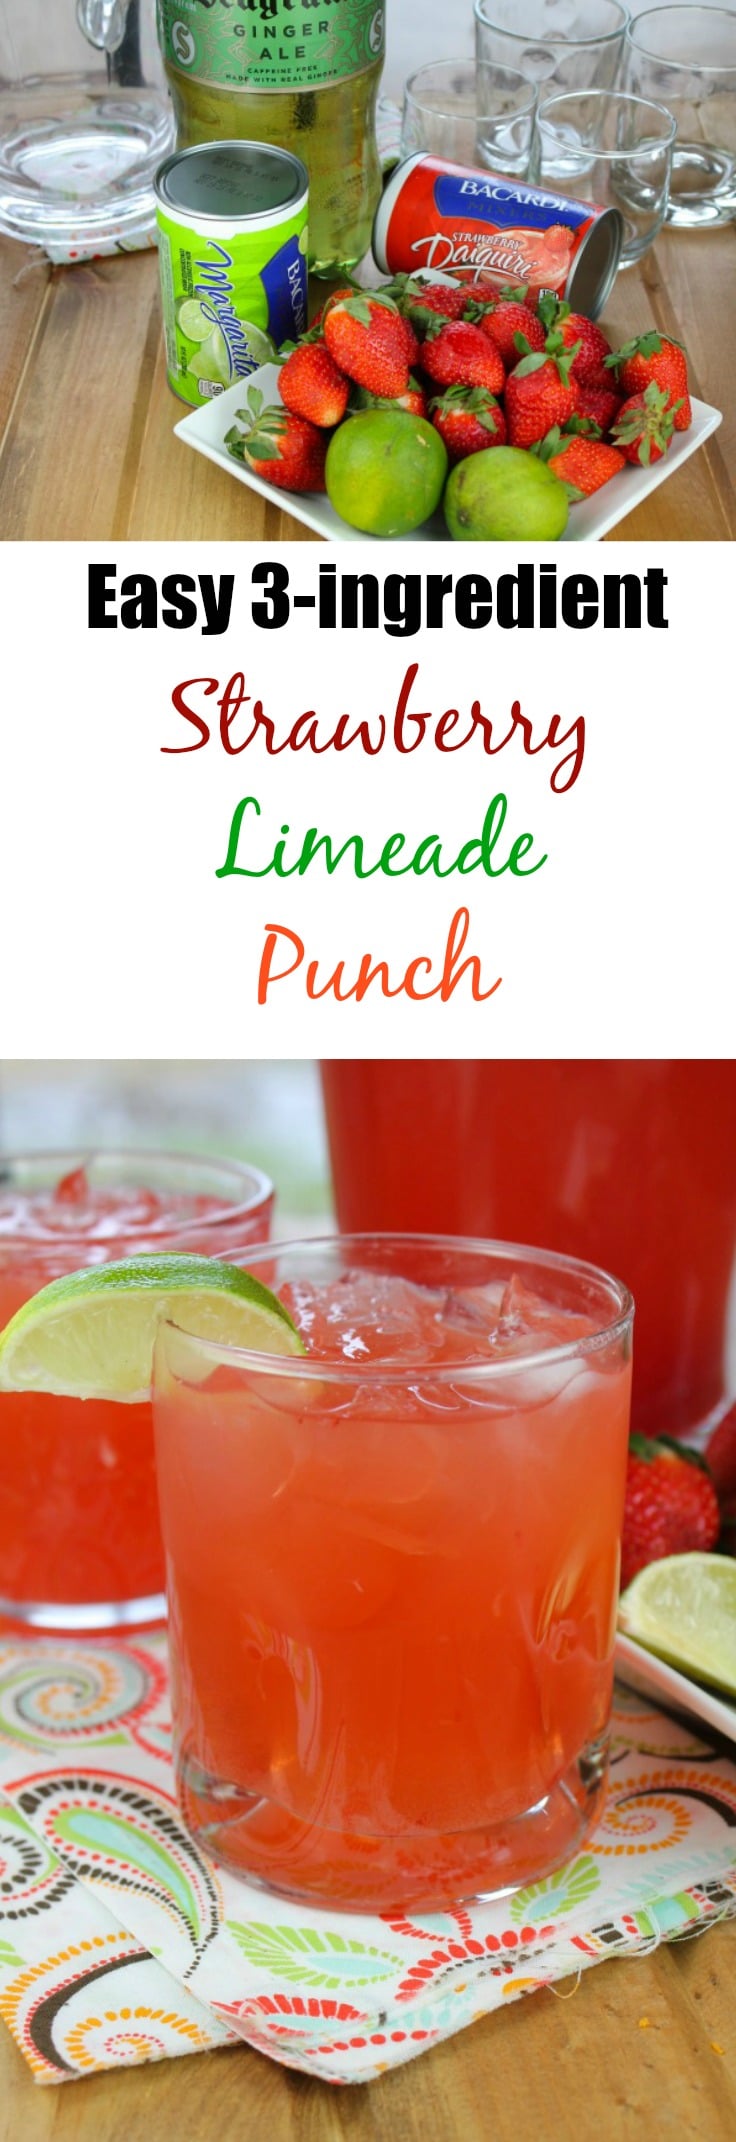 Easy Strawberry Limeade Punch - Miss in the Kitchen